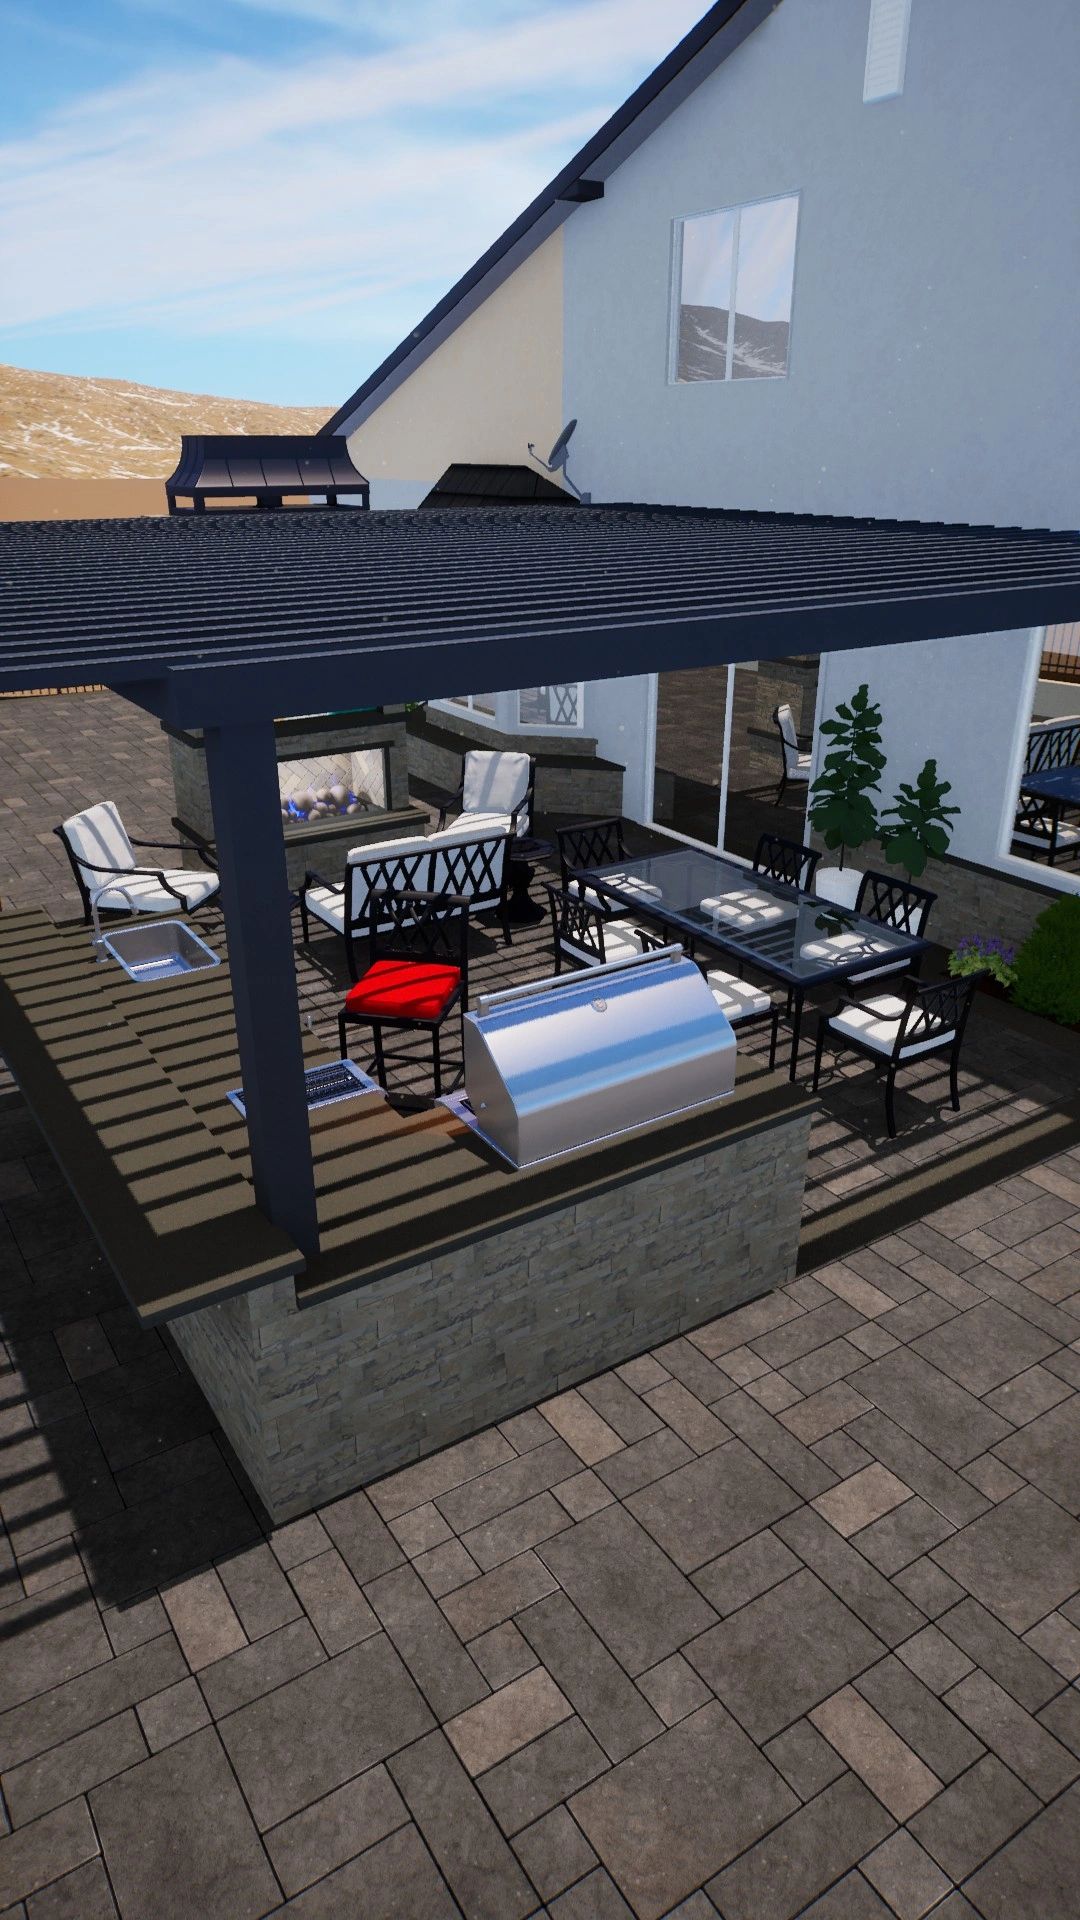 Concrete pavers with open lattice 4K Aluminum patio cover, over outdoor BBQ kitchen.